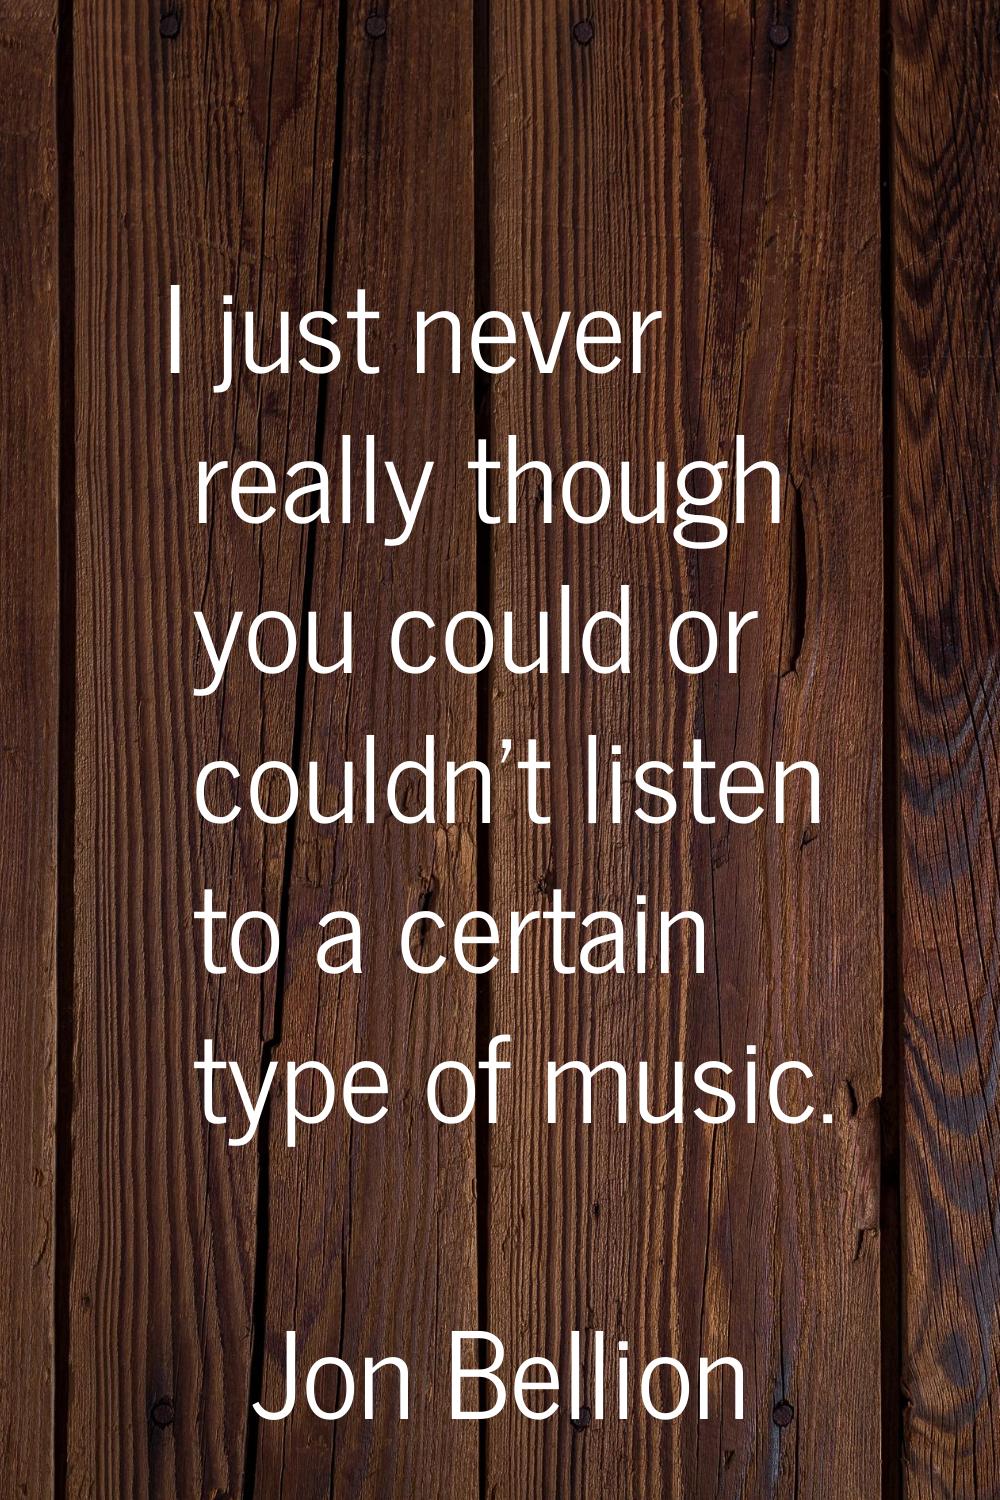 I just never really though you could or couldn't listen to a certain type of music.